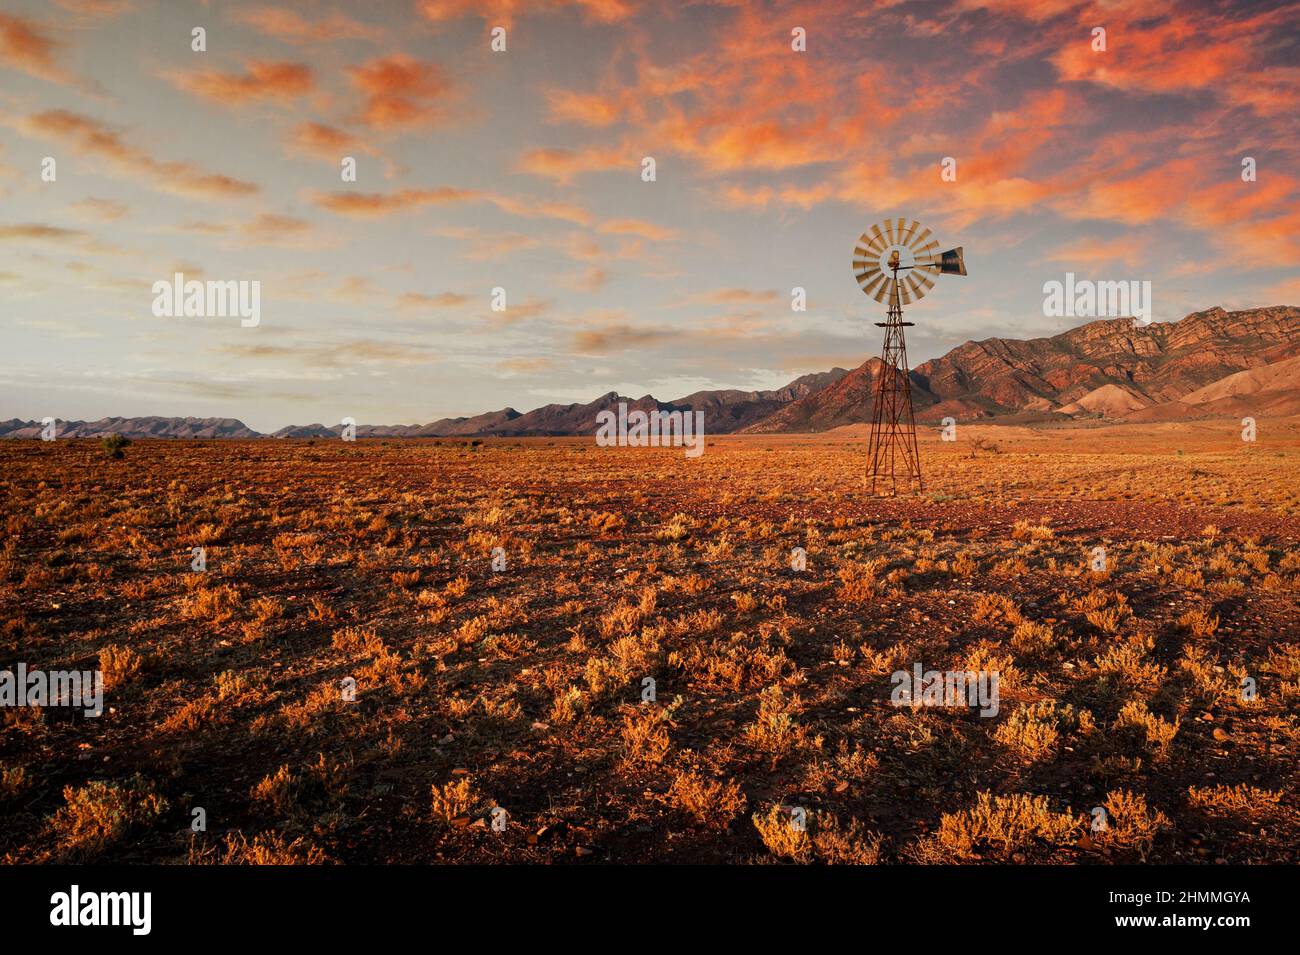 Iconic australian windmill at sunset in the Flinders Ranges. Stock Photo